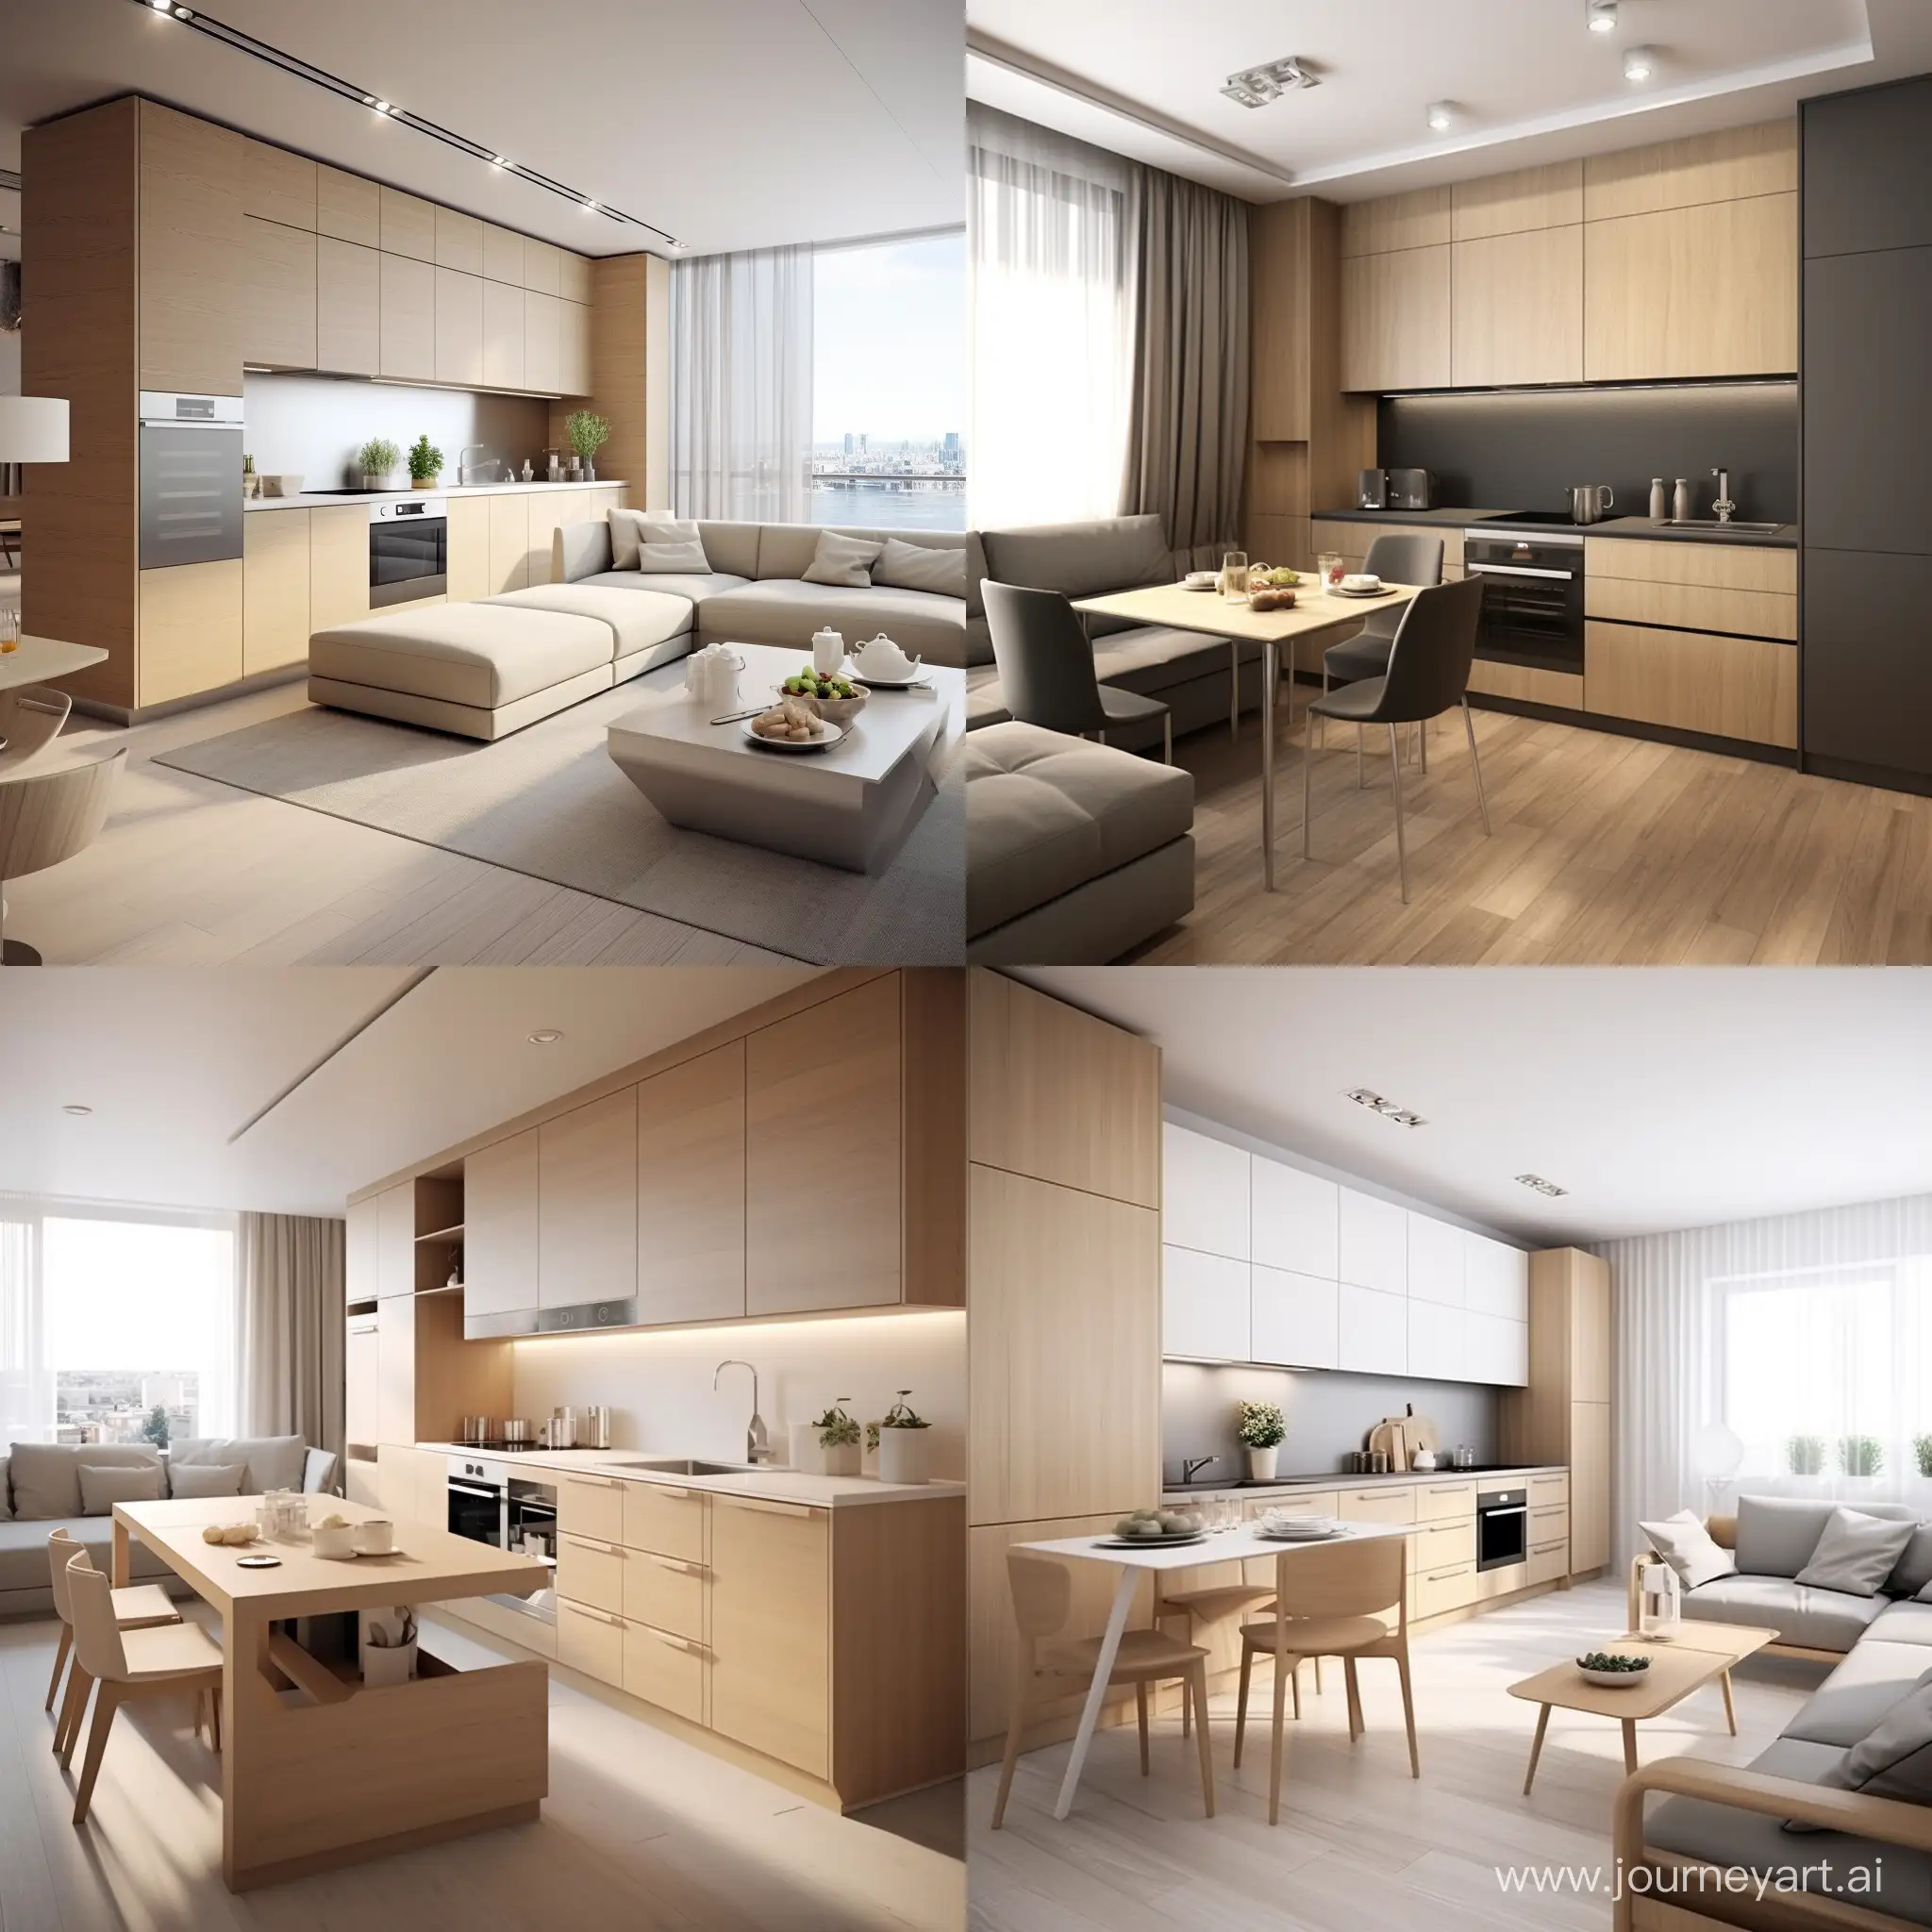 minimalist kitchen-living room with a panoramic window, kitchen furniture in oak veneer, stands in a niche, corner, starts from the left with a built-in refrigerator height to the ceiling width of 60 cm, further stands oven and microwave in a pencil case width of 60 cm and the height of the refrigerator, all cabinets are closed, at the end of the kitchen furniture there is a dining table and 4 upholstered chairs, there is a sofa with low armrests to the side of the kitchen furniture and back to the dining table, opposite the sofa there is a 65 inch TV set on the wall, a long narrow chest of drawers by the wall


